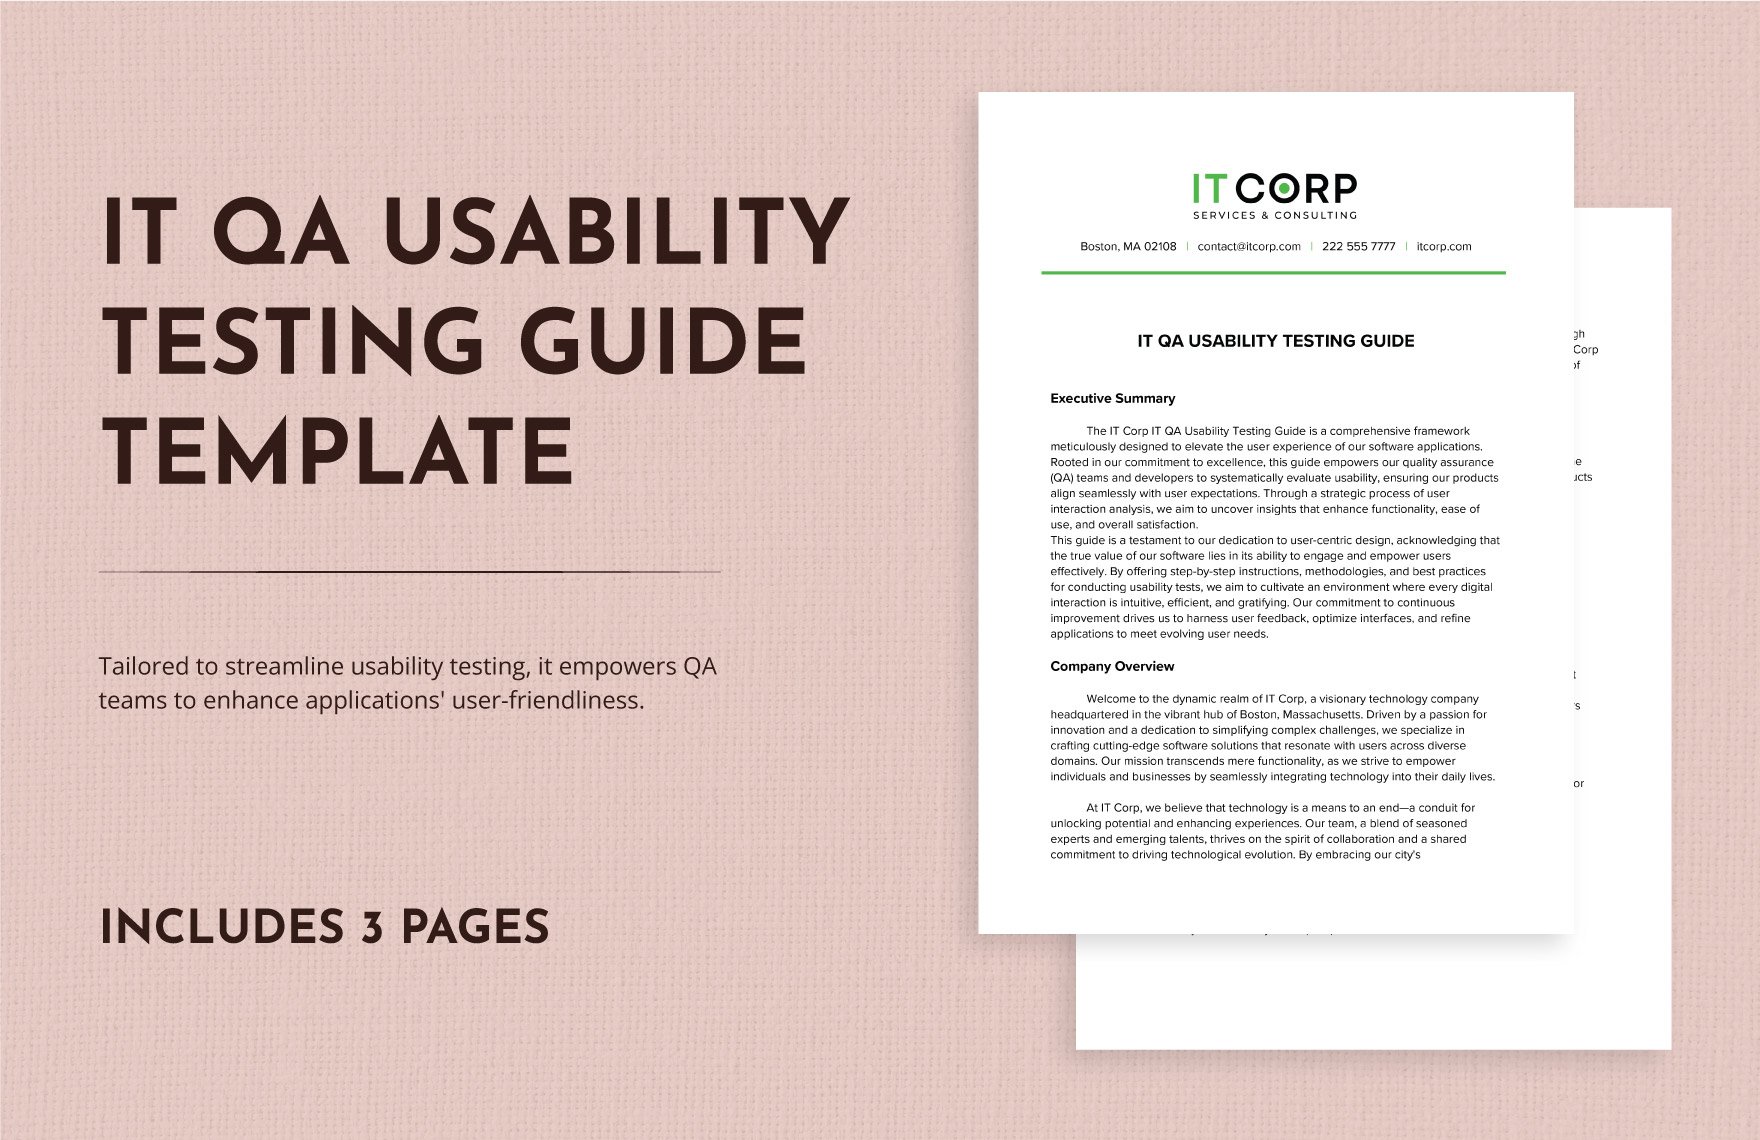 IT QA Usability Testing Guide Template in Word, Google Docs, PDF